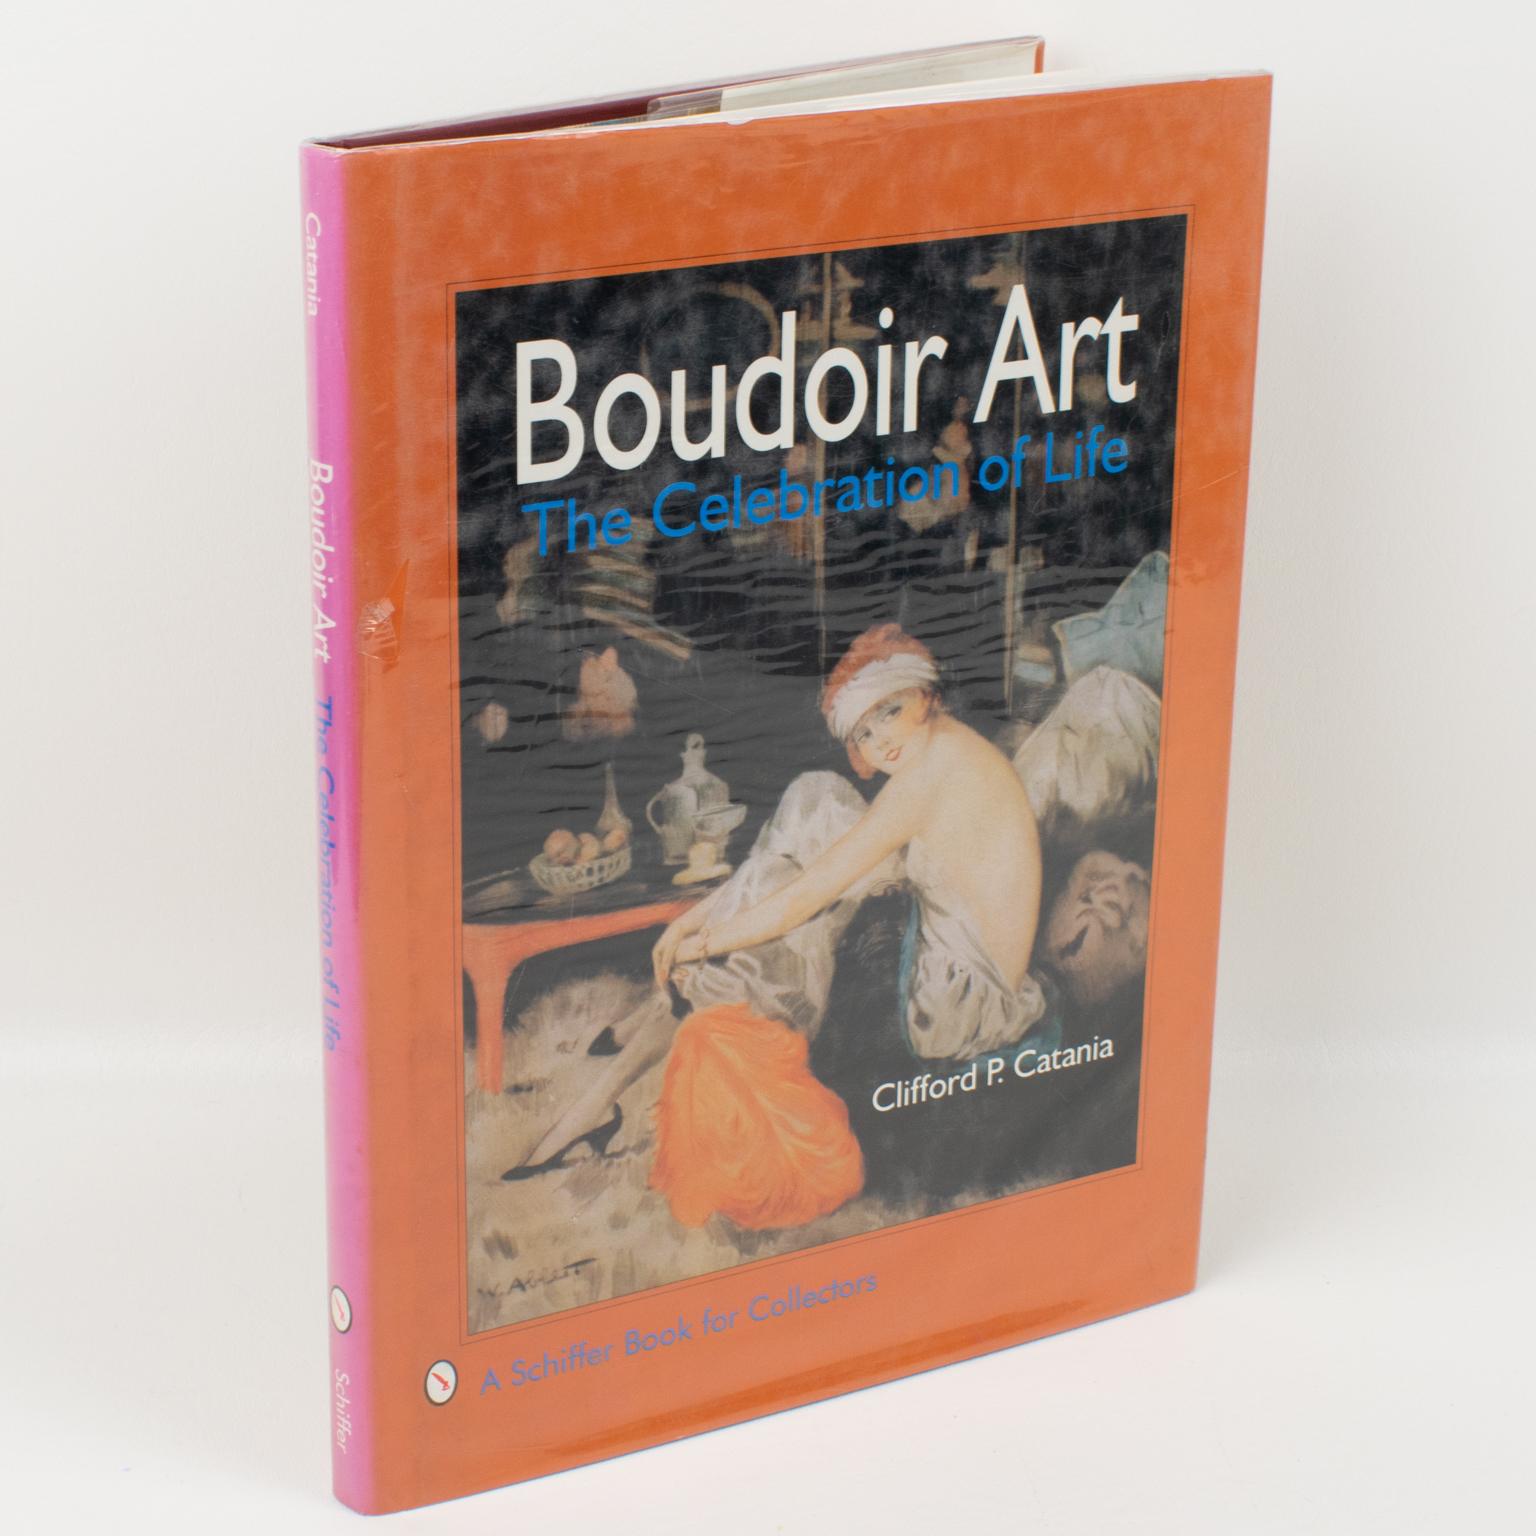 Boudoir Art, The Celebration of Life book by Clifford P. Catania, 1994.
The pictures of beautiful and powerful women by artists of the Boudoir art movement occupy an important place in the history of twentieth-century art. The popularity of Louis